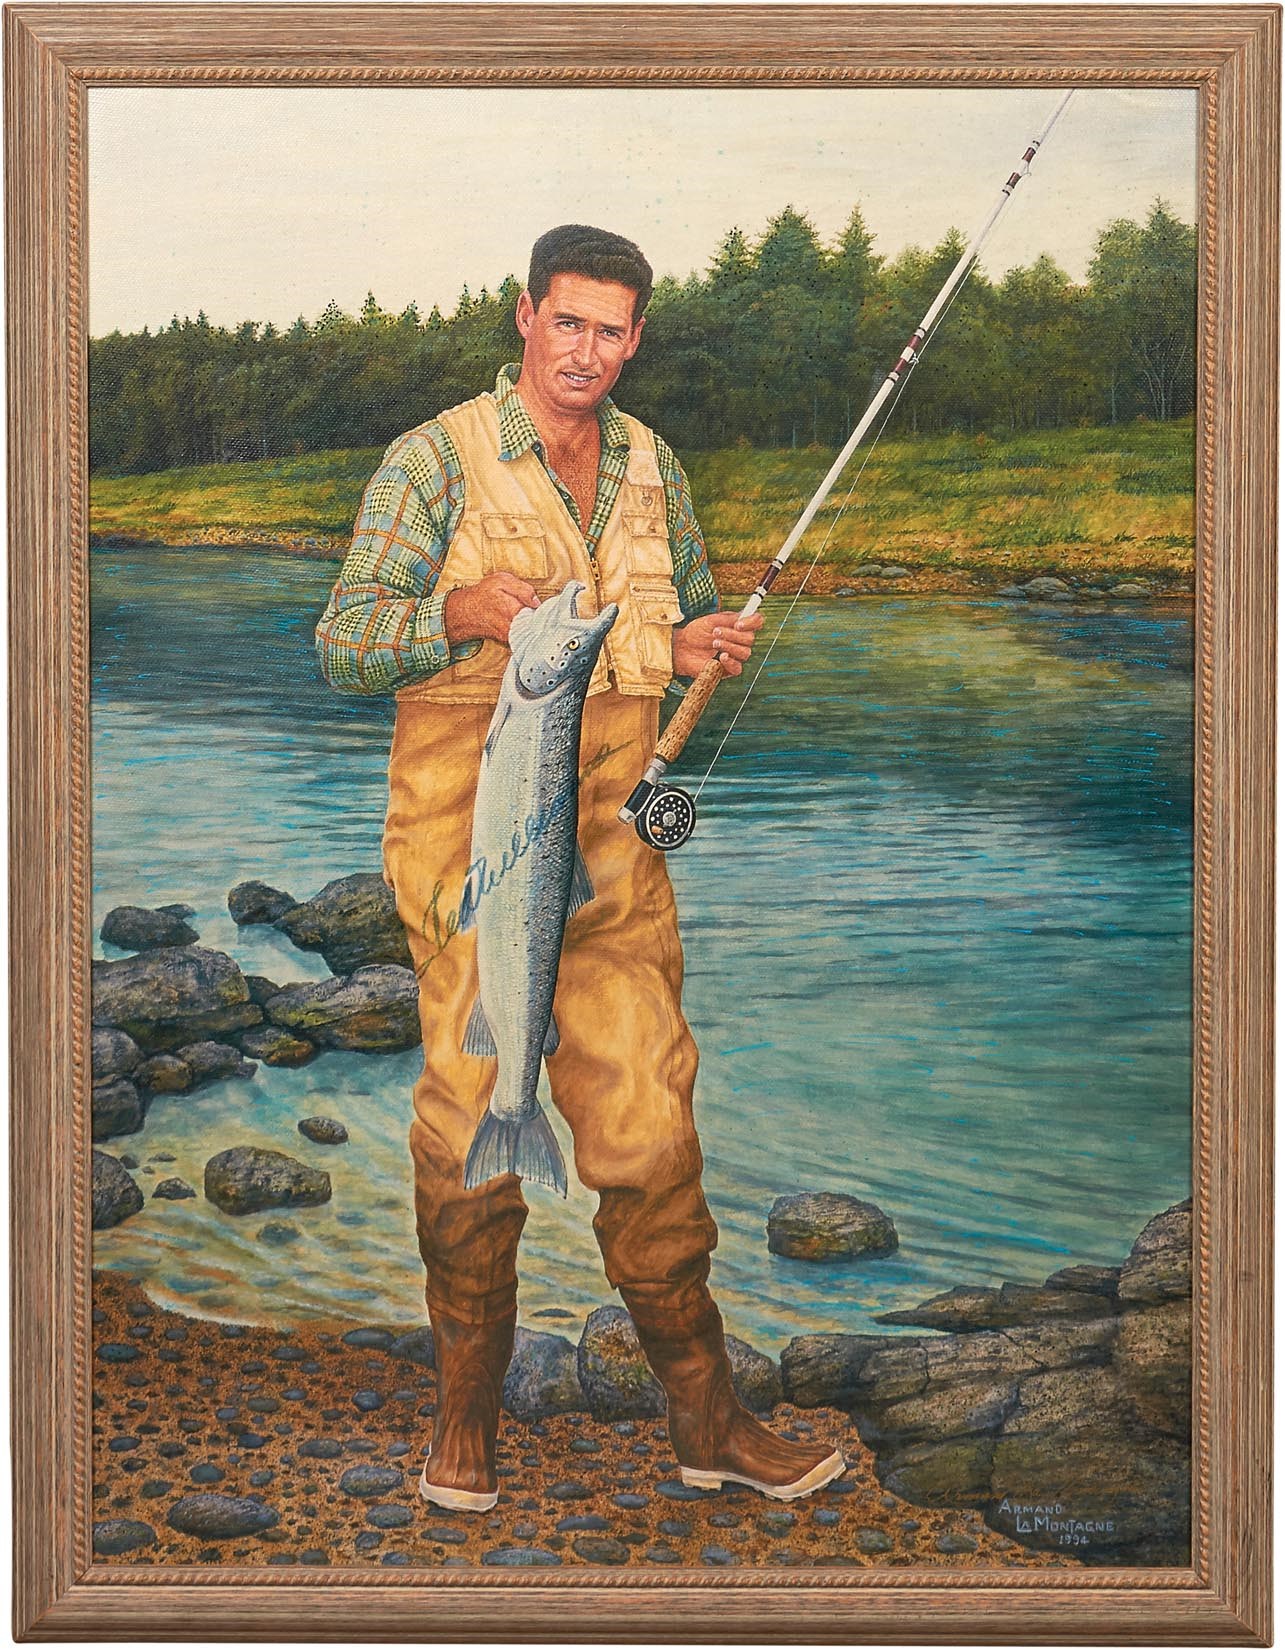 Boston Sports - Ted Williams Fly Fishing Collection w/Used Rod, Reel and Artwork